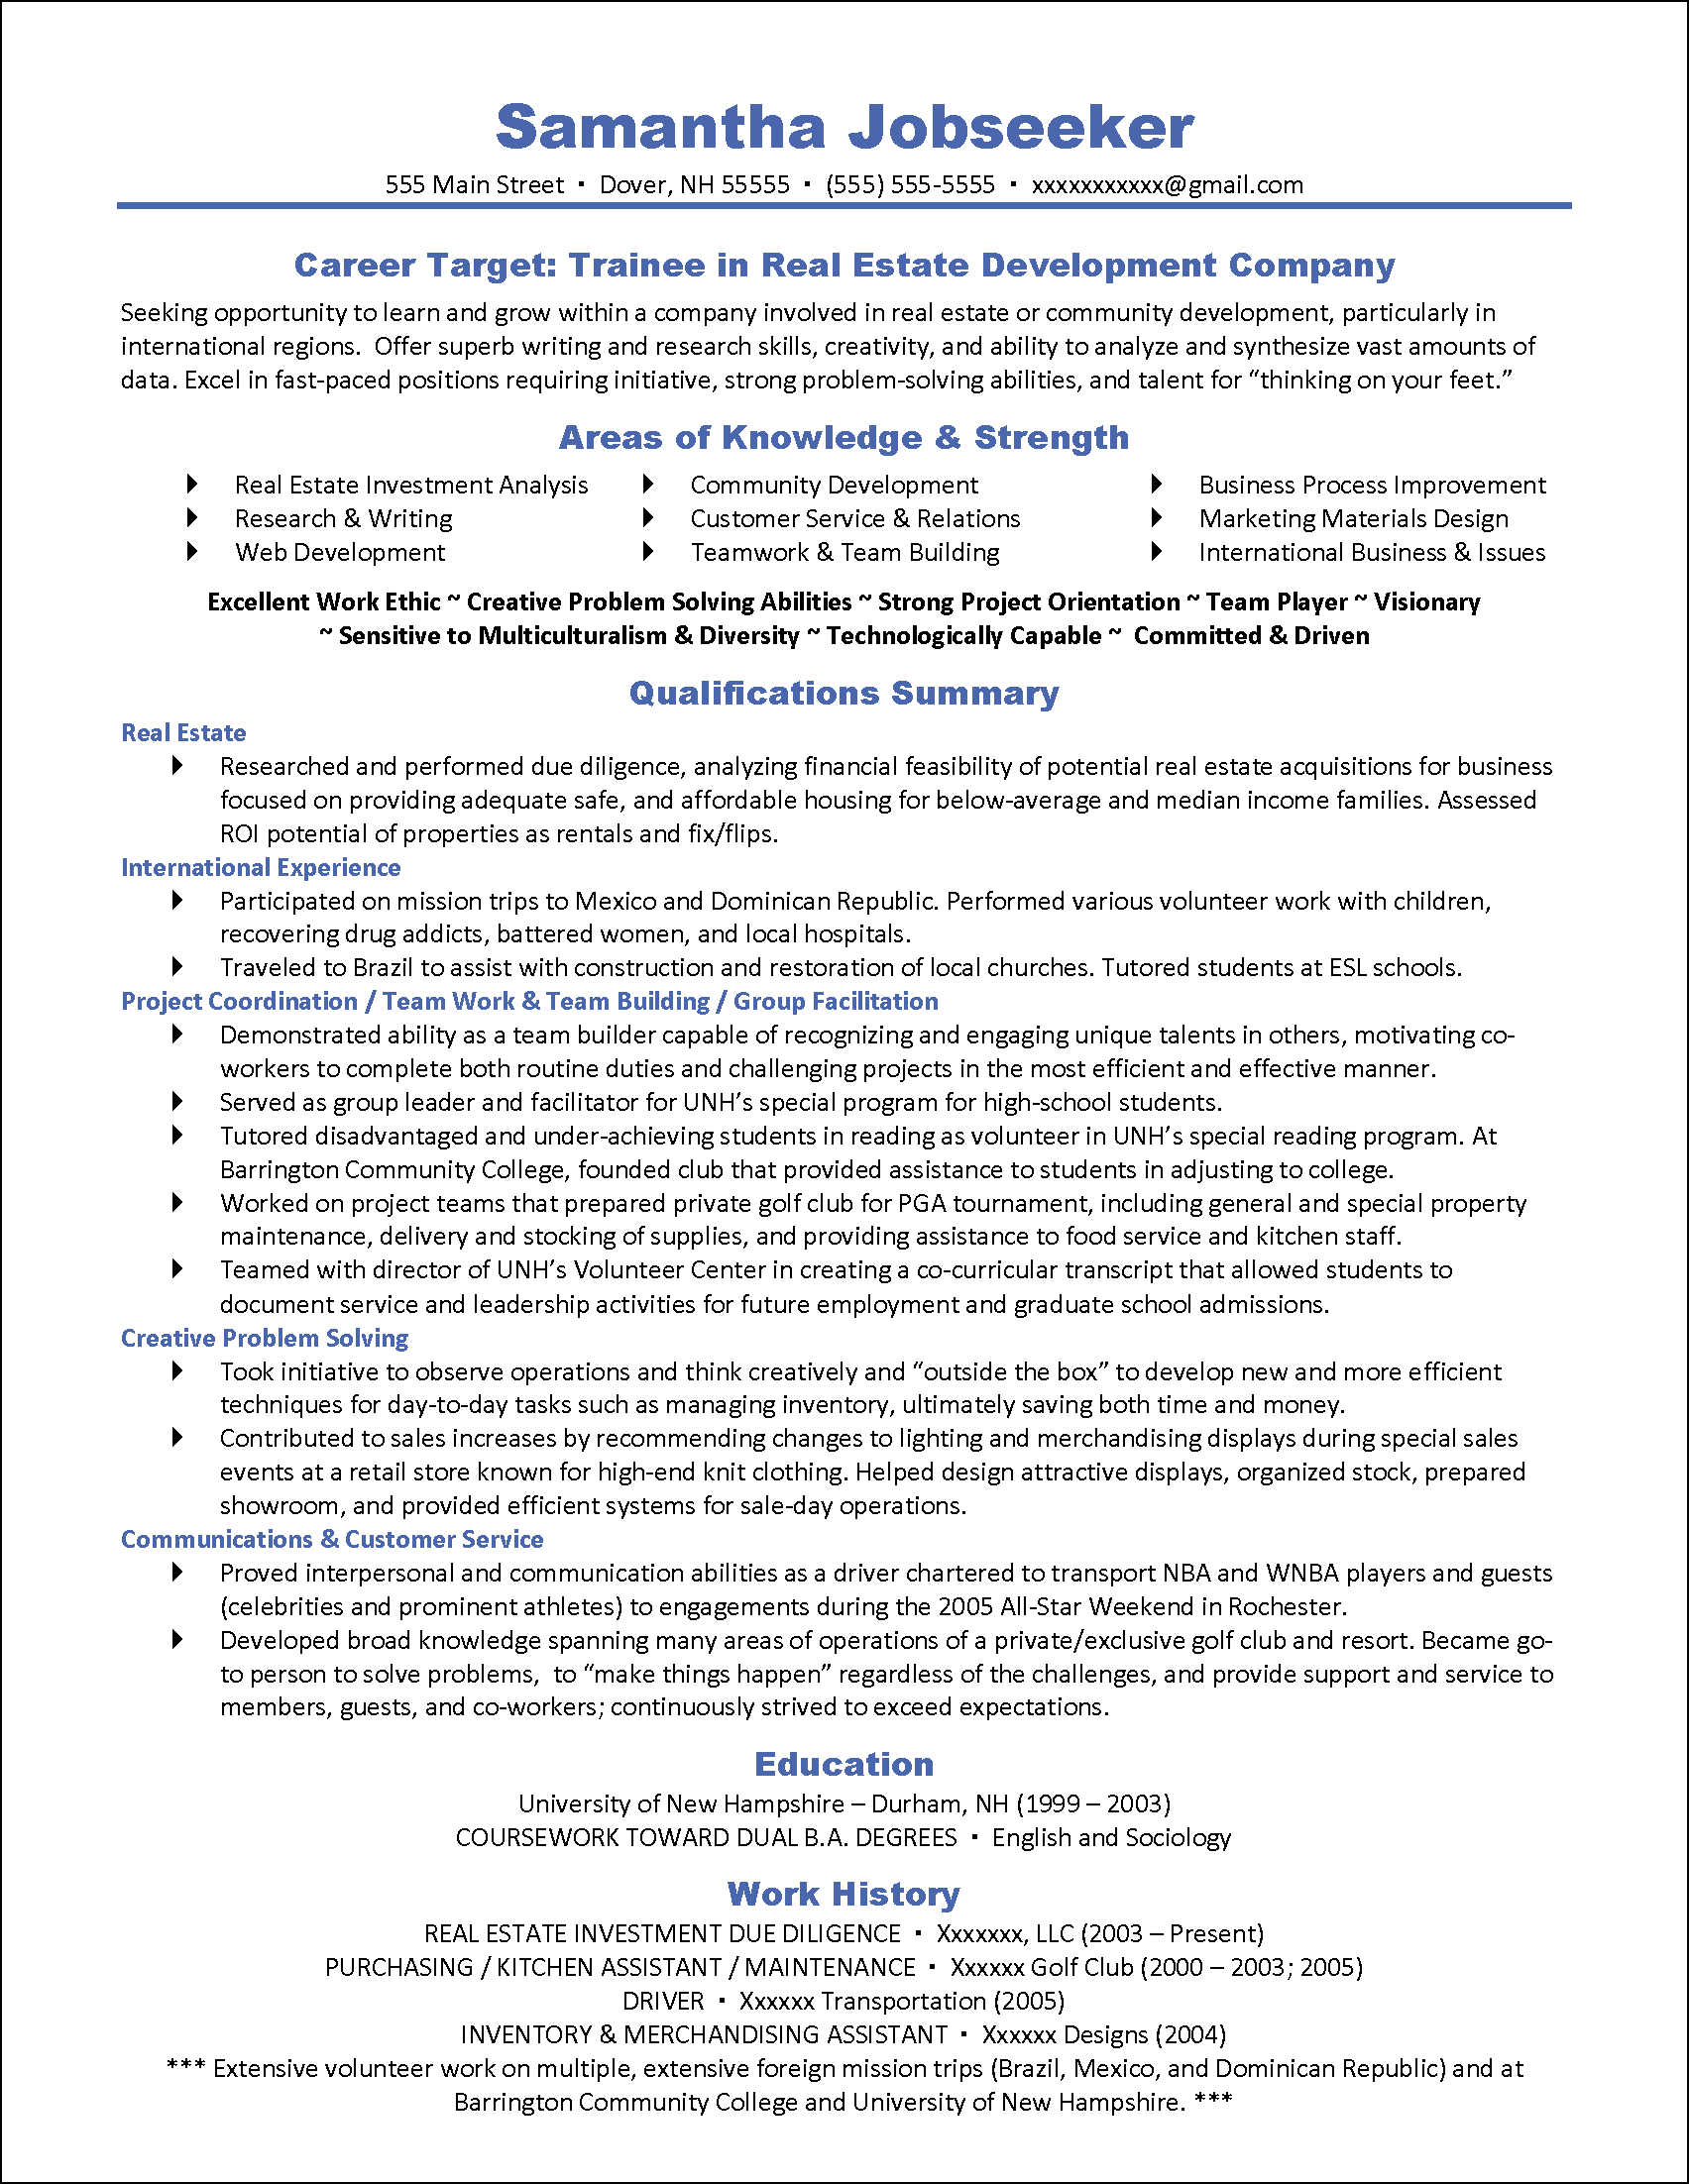 Howto Write a Targeted Resume